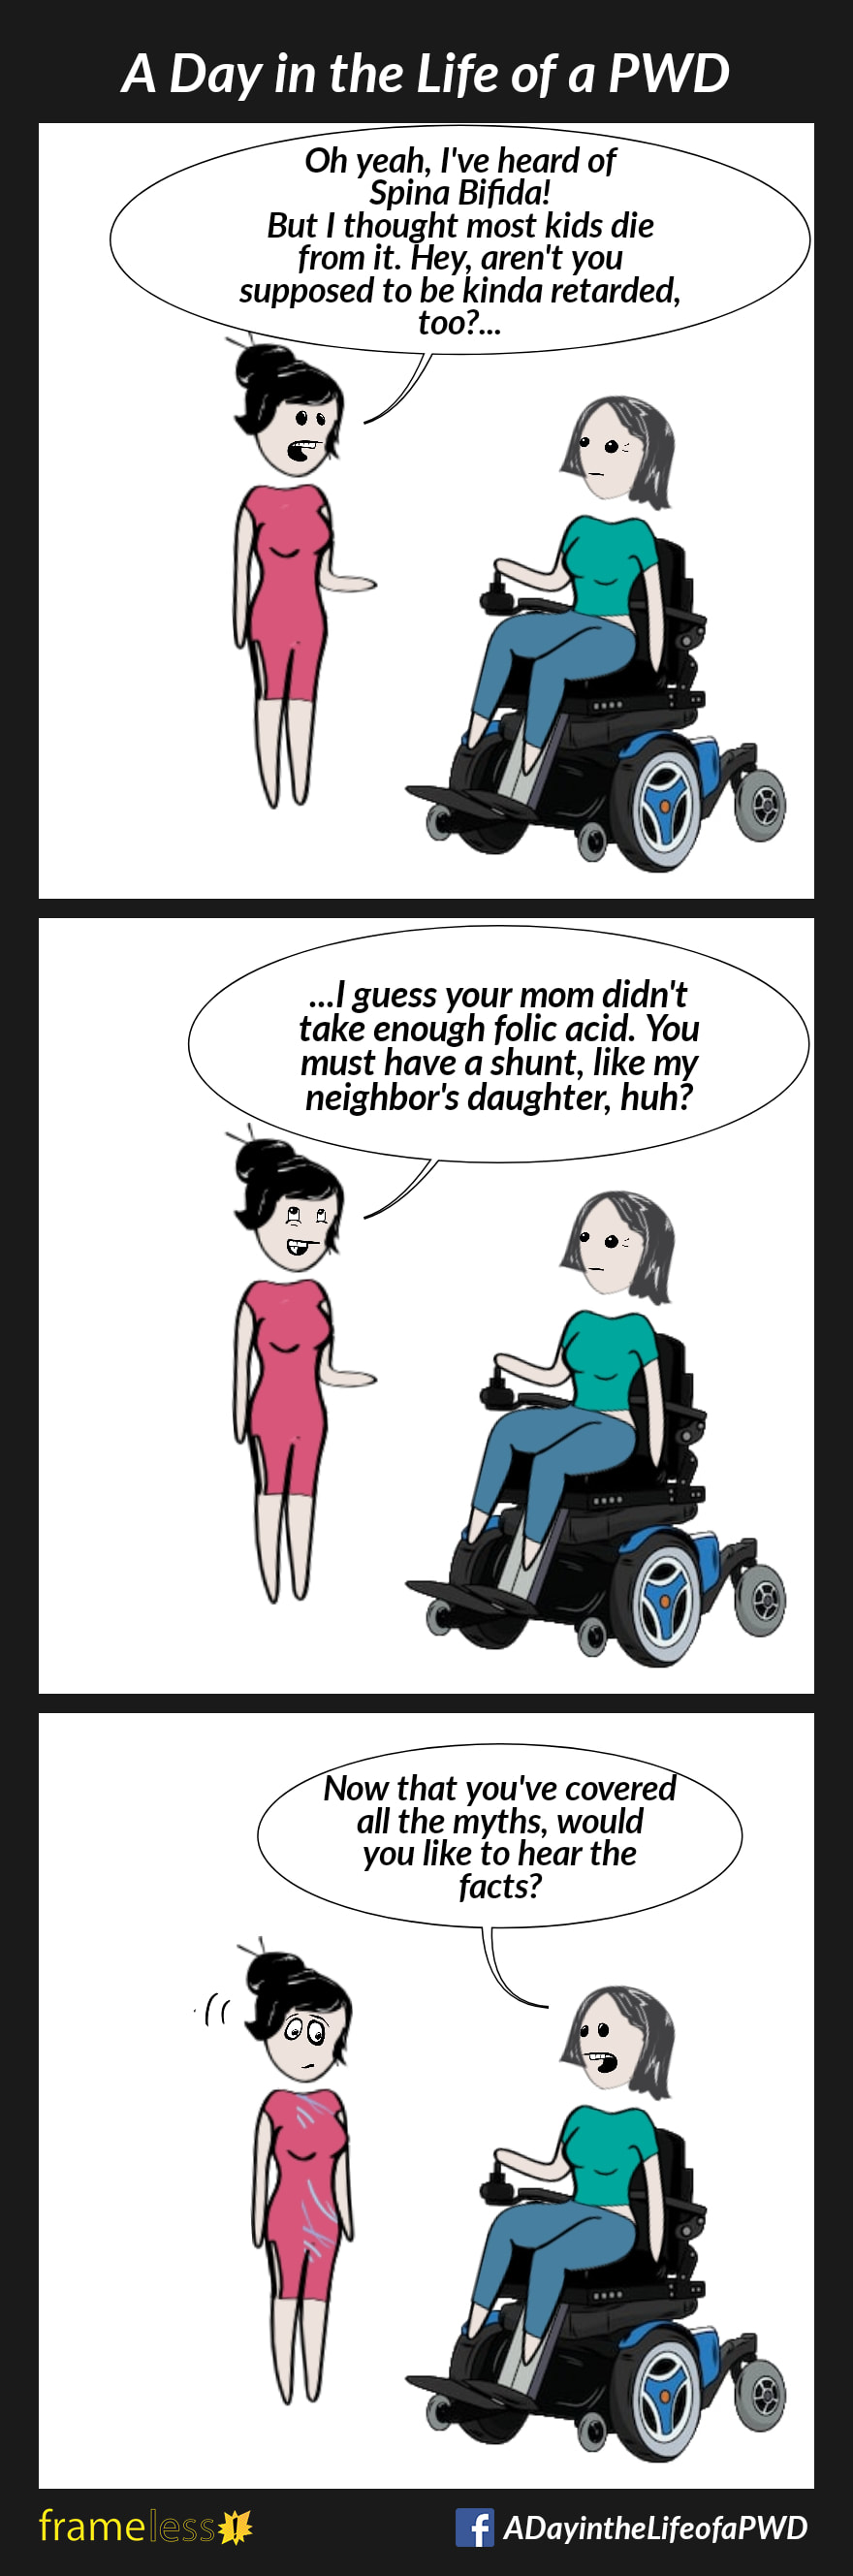 COMIC STRIP 
A Day in the Life of a PWD (Person With a Disability) 

Frame 1:
A woman in a power wheelchair is talking with an acquaintance. 
ACQUAINTANCE: Oh yeah. I've heard of Spina Bifida! But I thought most kids die from it. Hey, aren't you supposed to be kinda retarded, too?...

Frame 2:
ACQUAINTANCE: ...I guess your mom didn't take enough folic acid. You must have a shunt, like my neighbor’s daughter, huh?

Frame 3:
WOMAN: Now that you've covered all the myths, would you like to hear the facts?